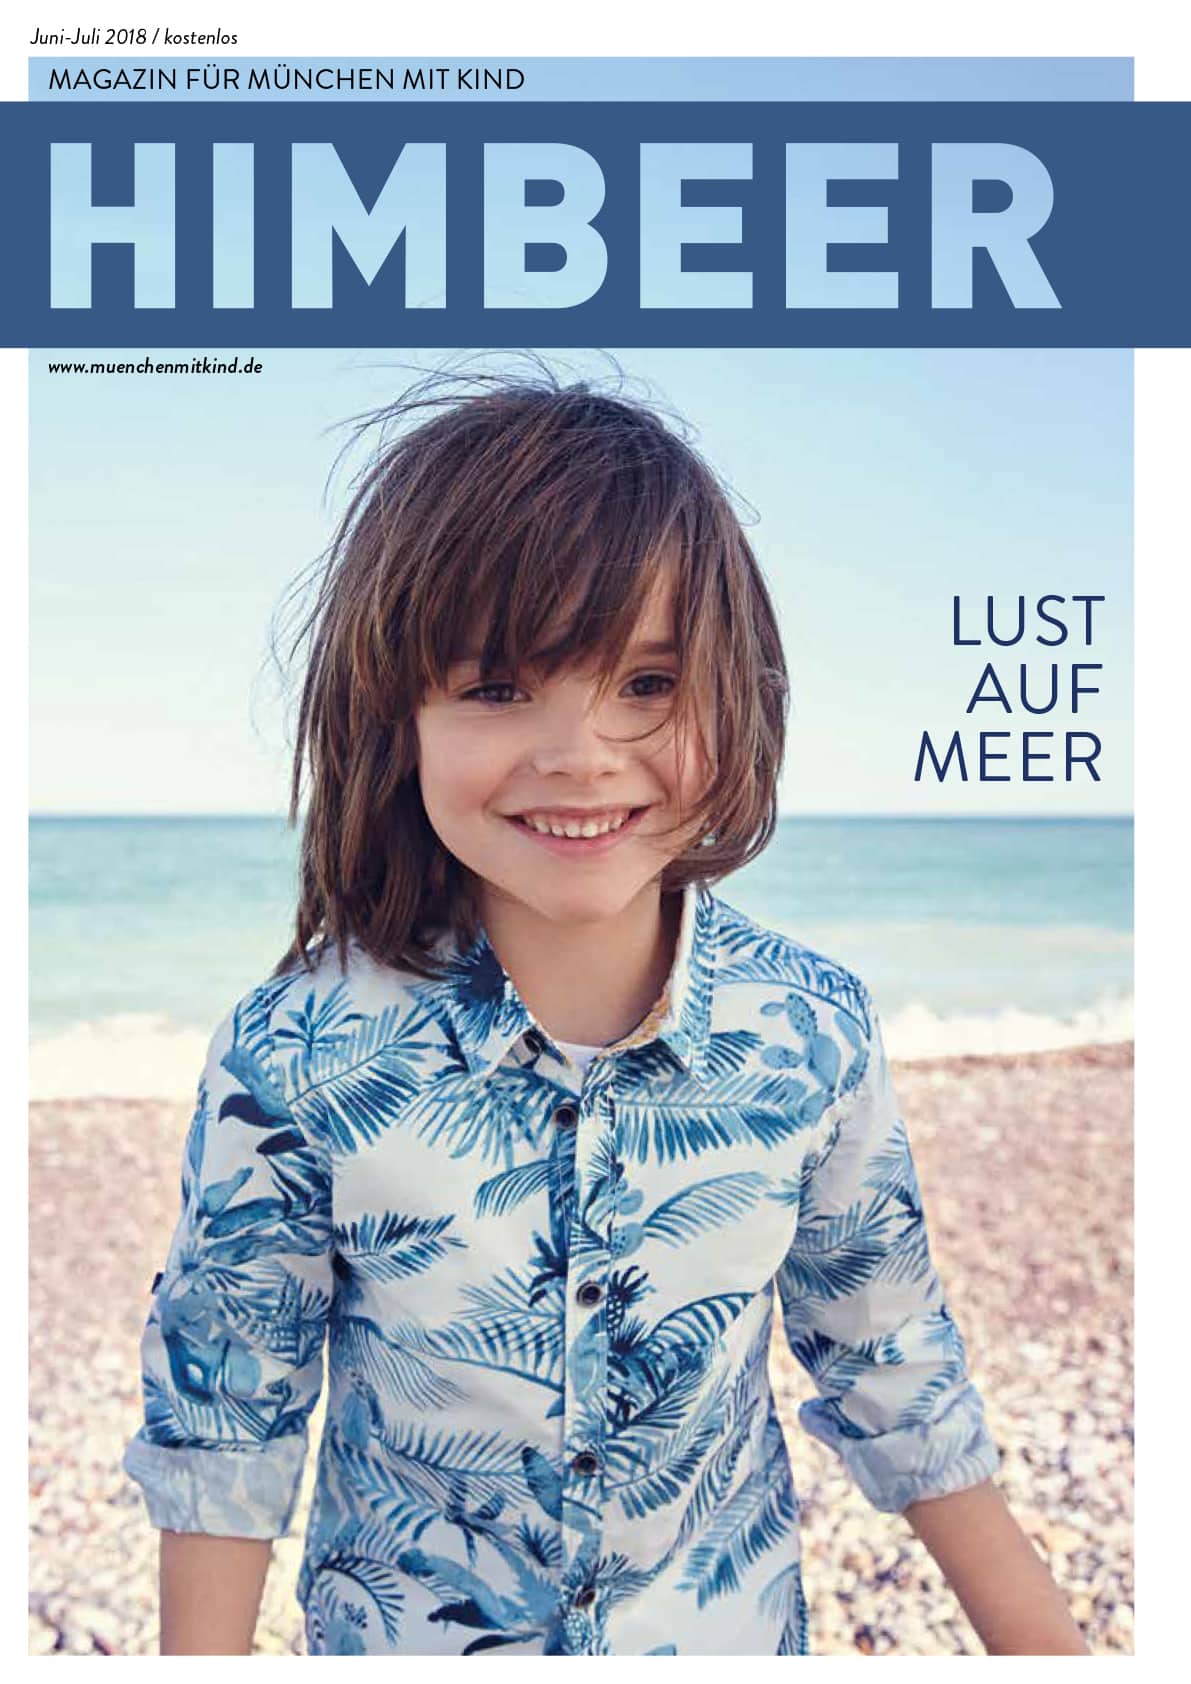 HIMBEER032018 MUC Cover